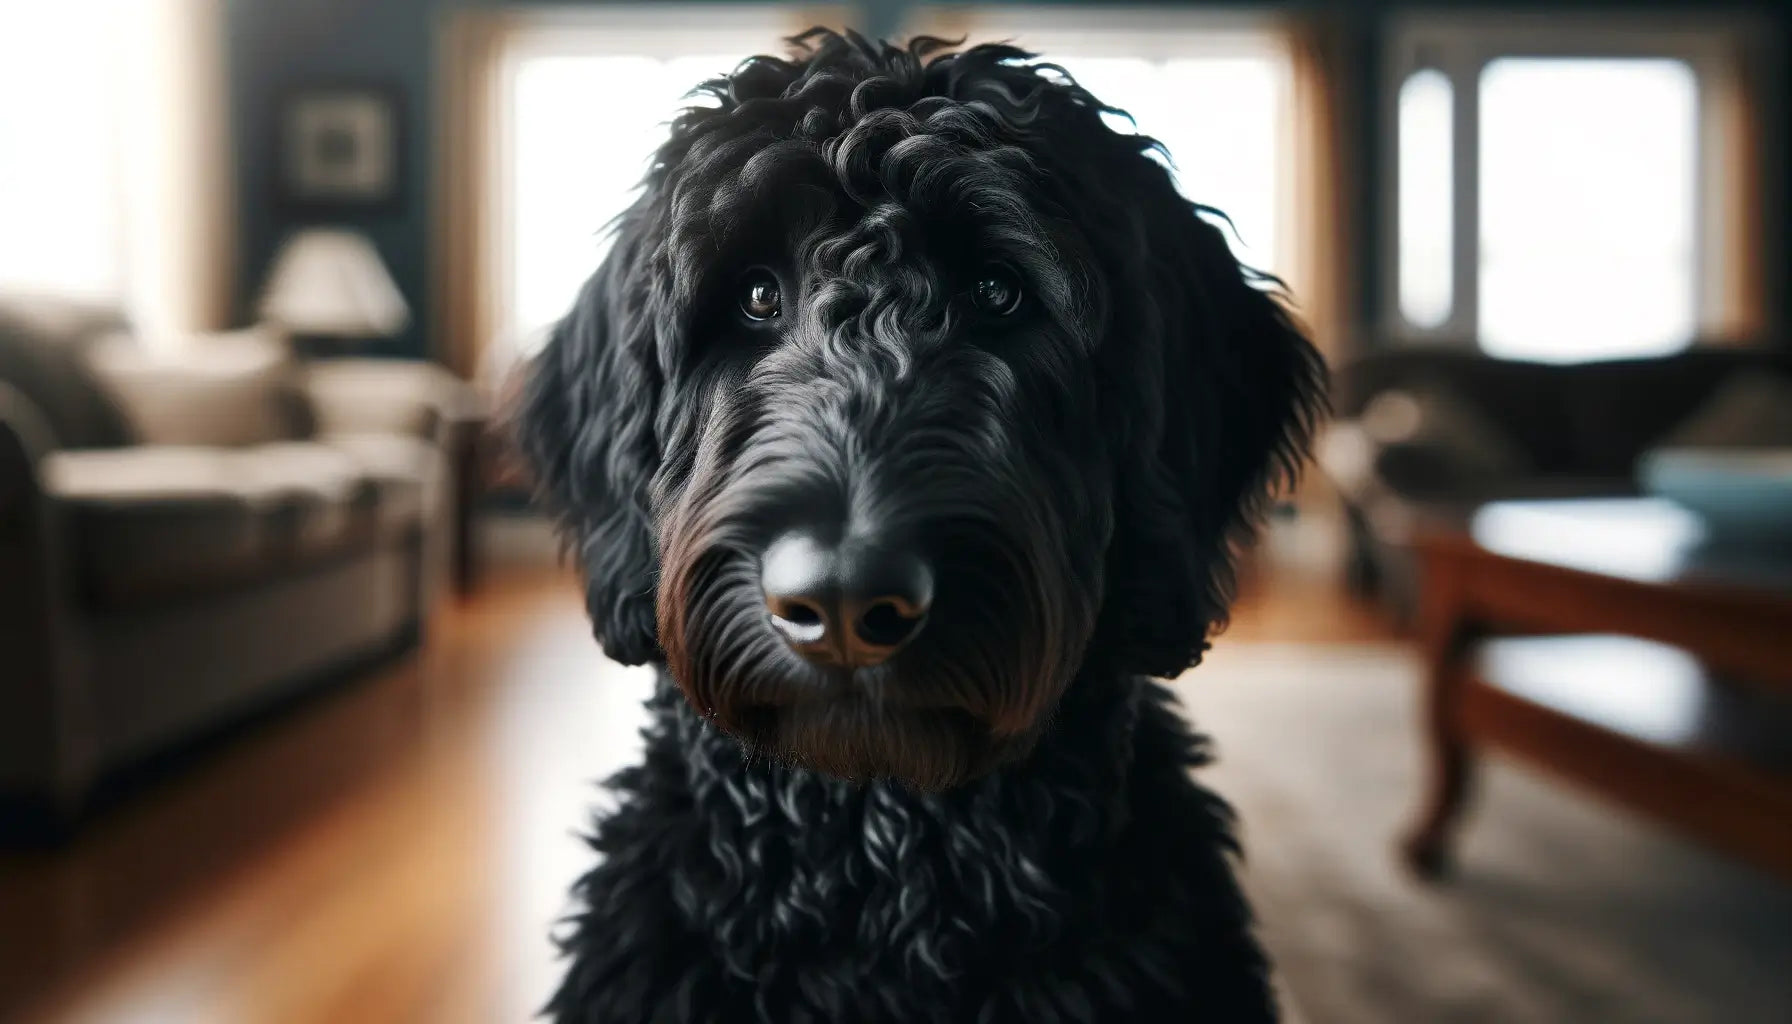 Black Goldendoodle indoors with a focused gaze, featuring tight black curls and a shiny coat.